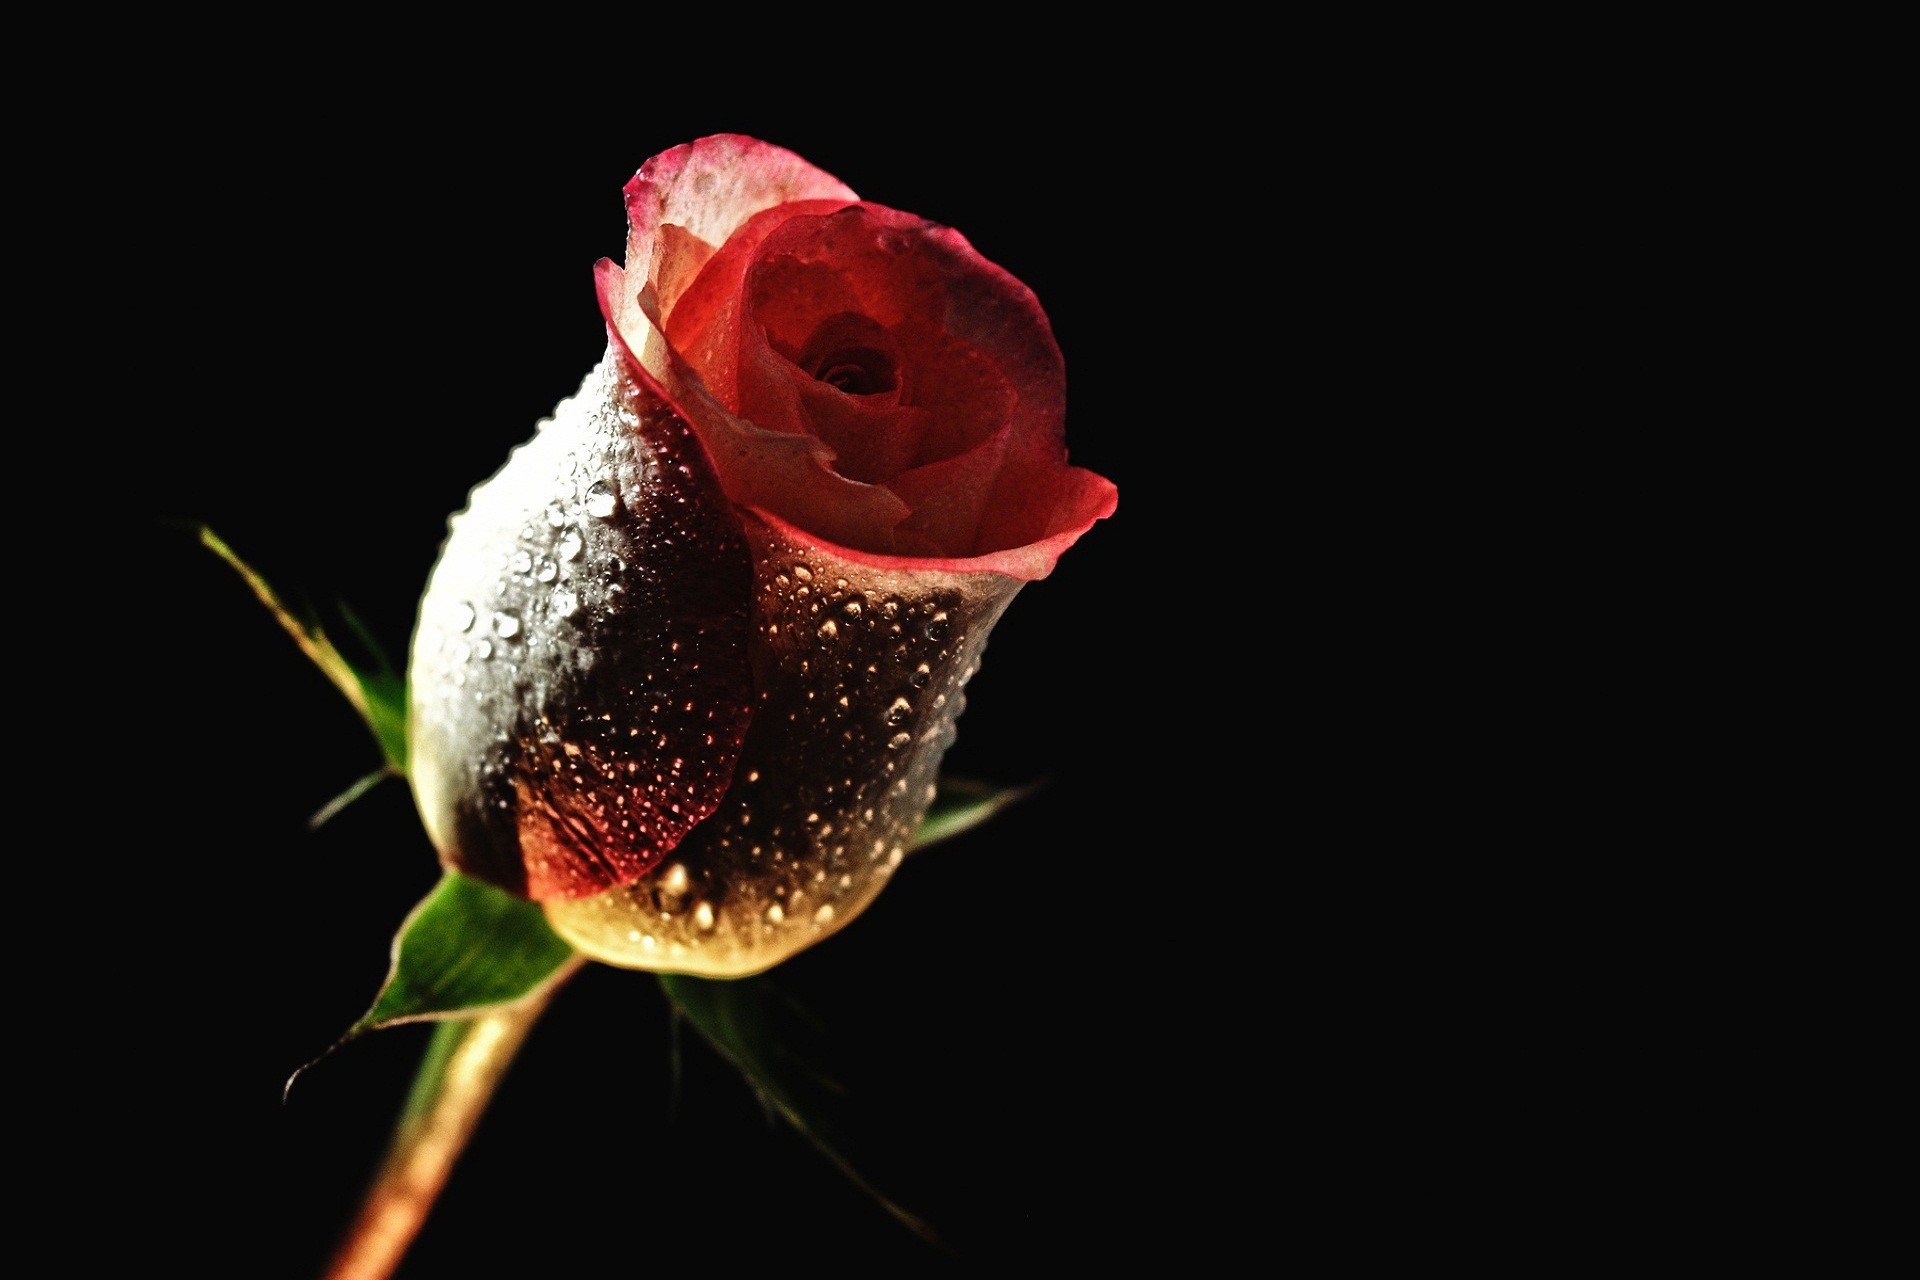 1920x1280 Explore Flower Backgrounds, Hd Backgrounds, and more! Red Rose With Black  Backgrounds Wallpaper